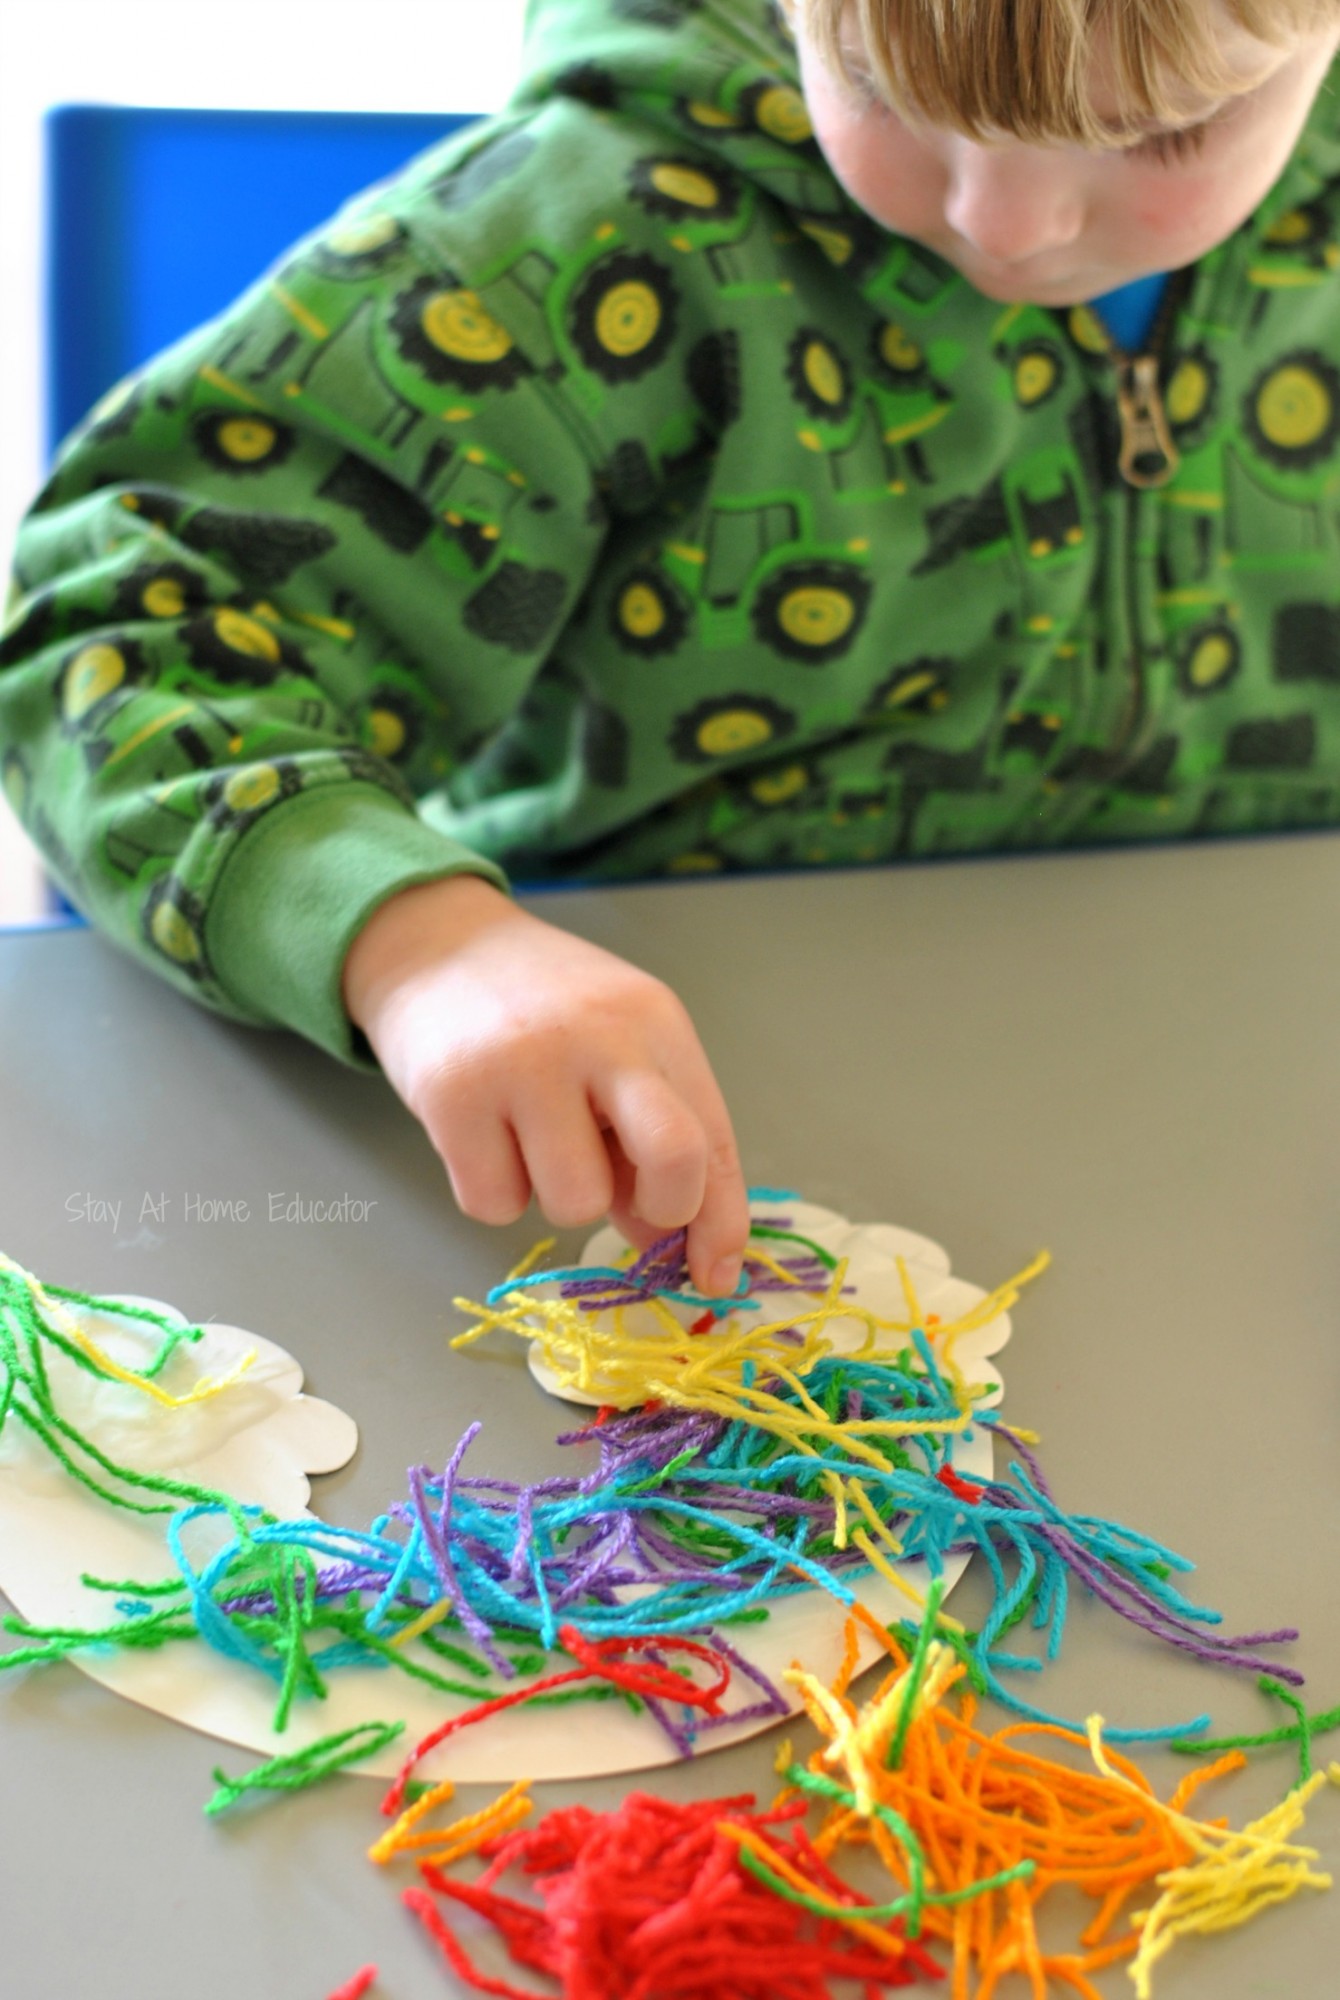 Yarn rainbow craft for three year olds - Stay At Home Educator